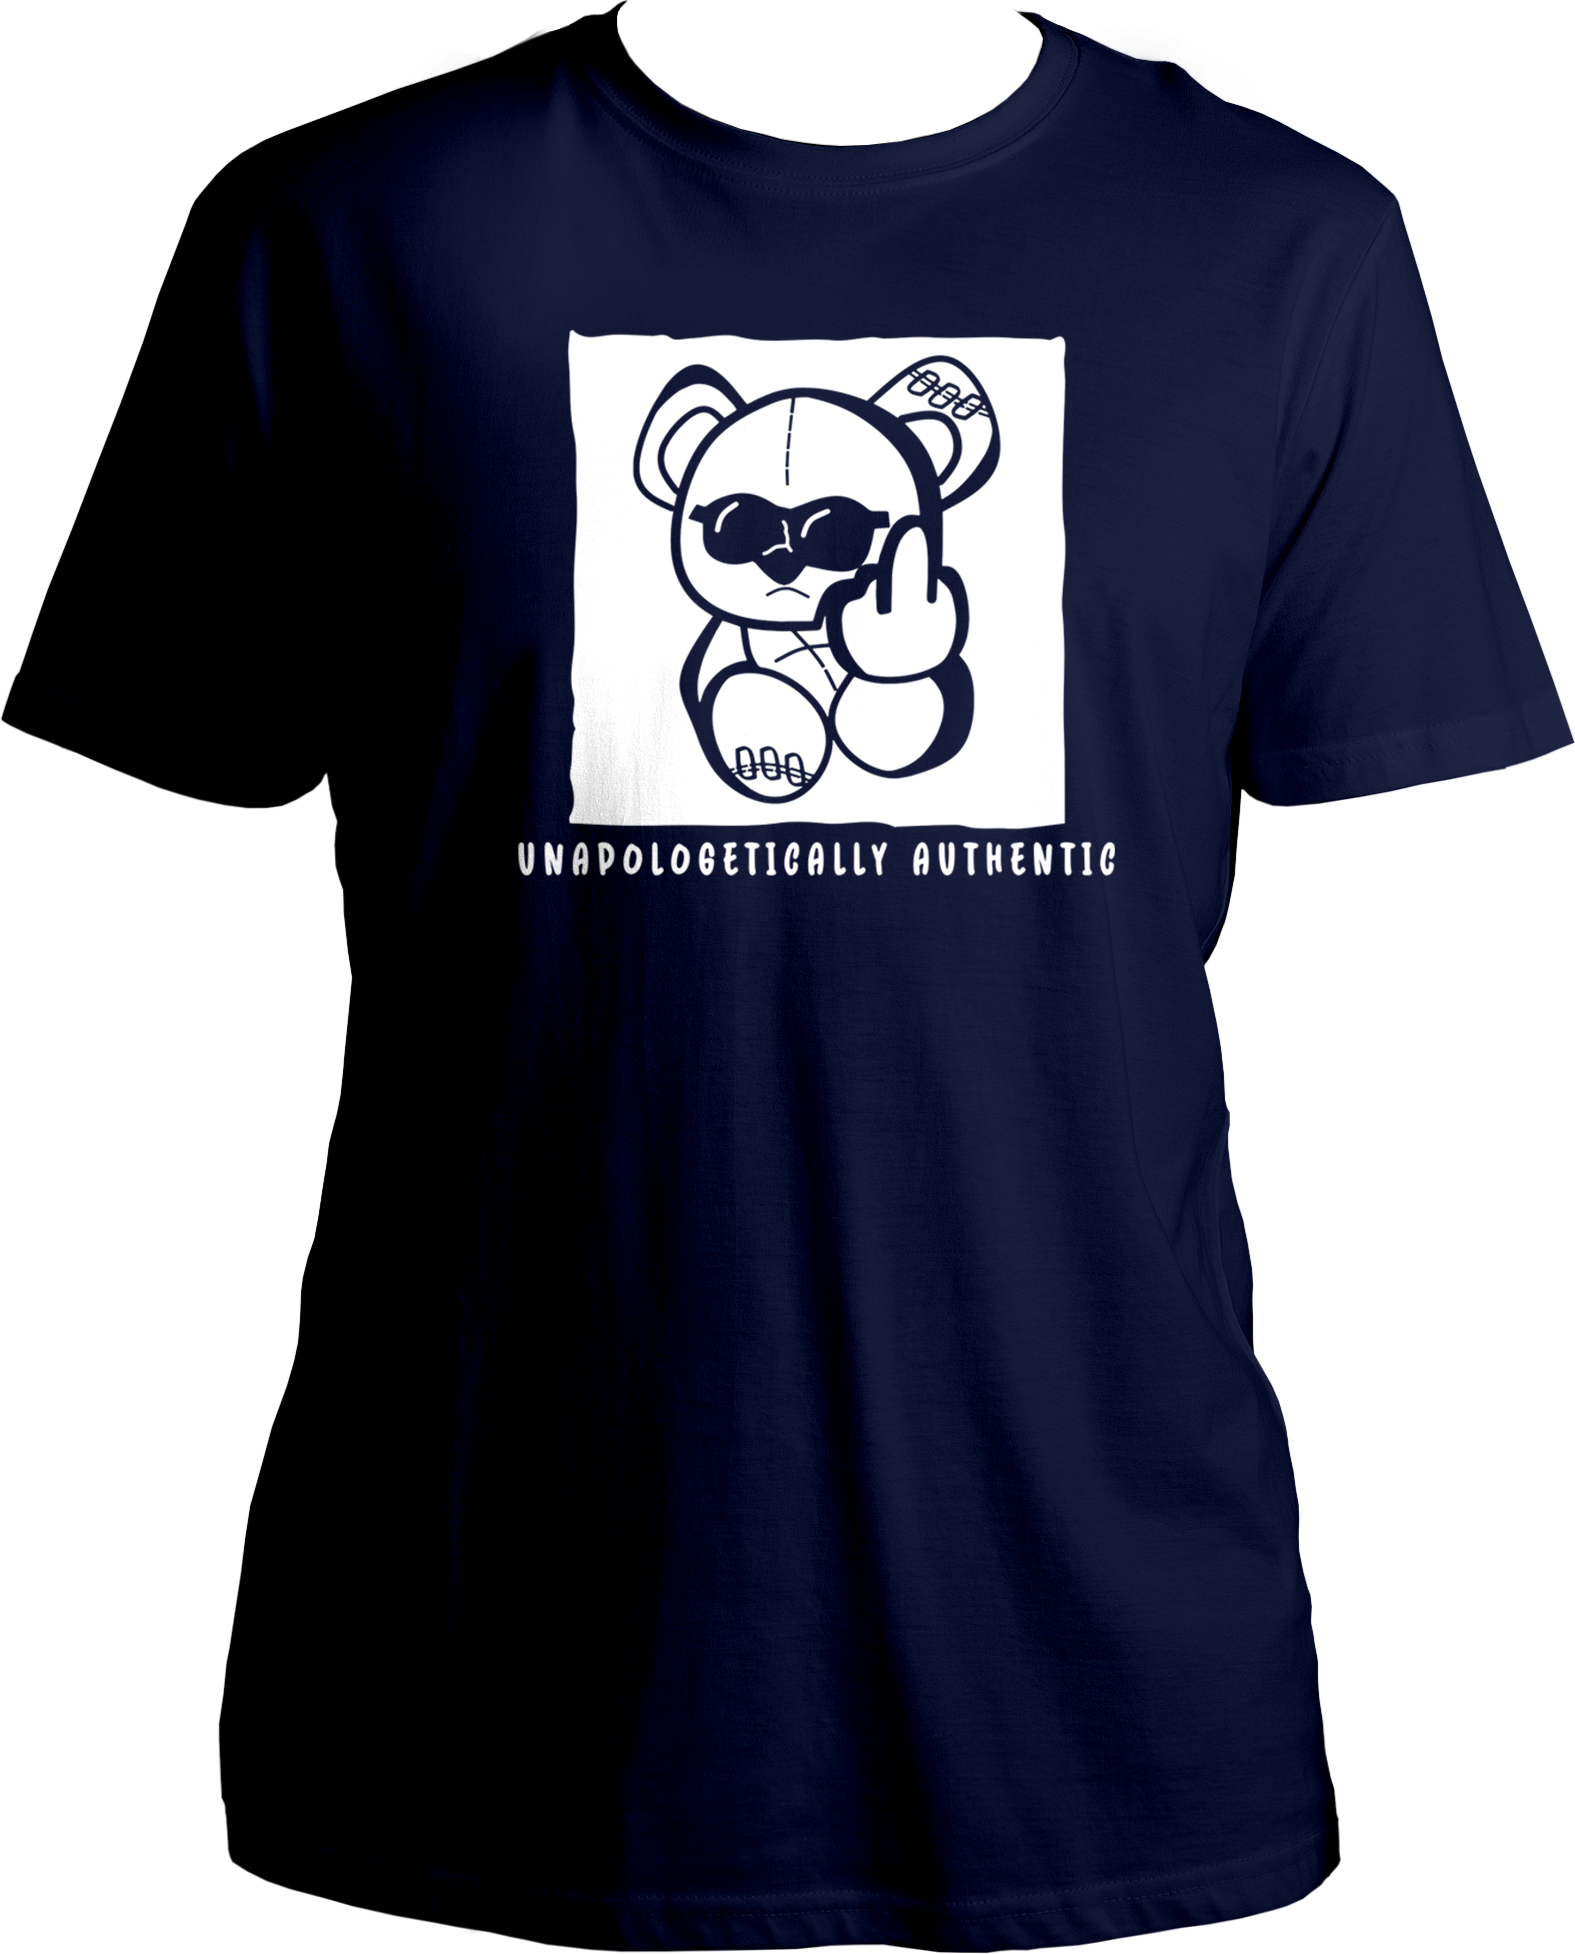 Show your true colors with the Unapologetically Authentic Unisex Cotton T-Shirt, perfect for fans who embrace KR$NA’s bold, unfiltered style. This T-shirt features the famous Flipping Finger Teddy Bear, making a statement that's both rebellious and iconic.